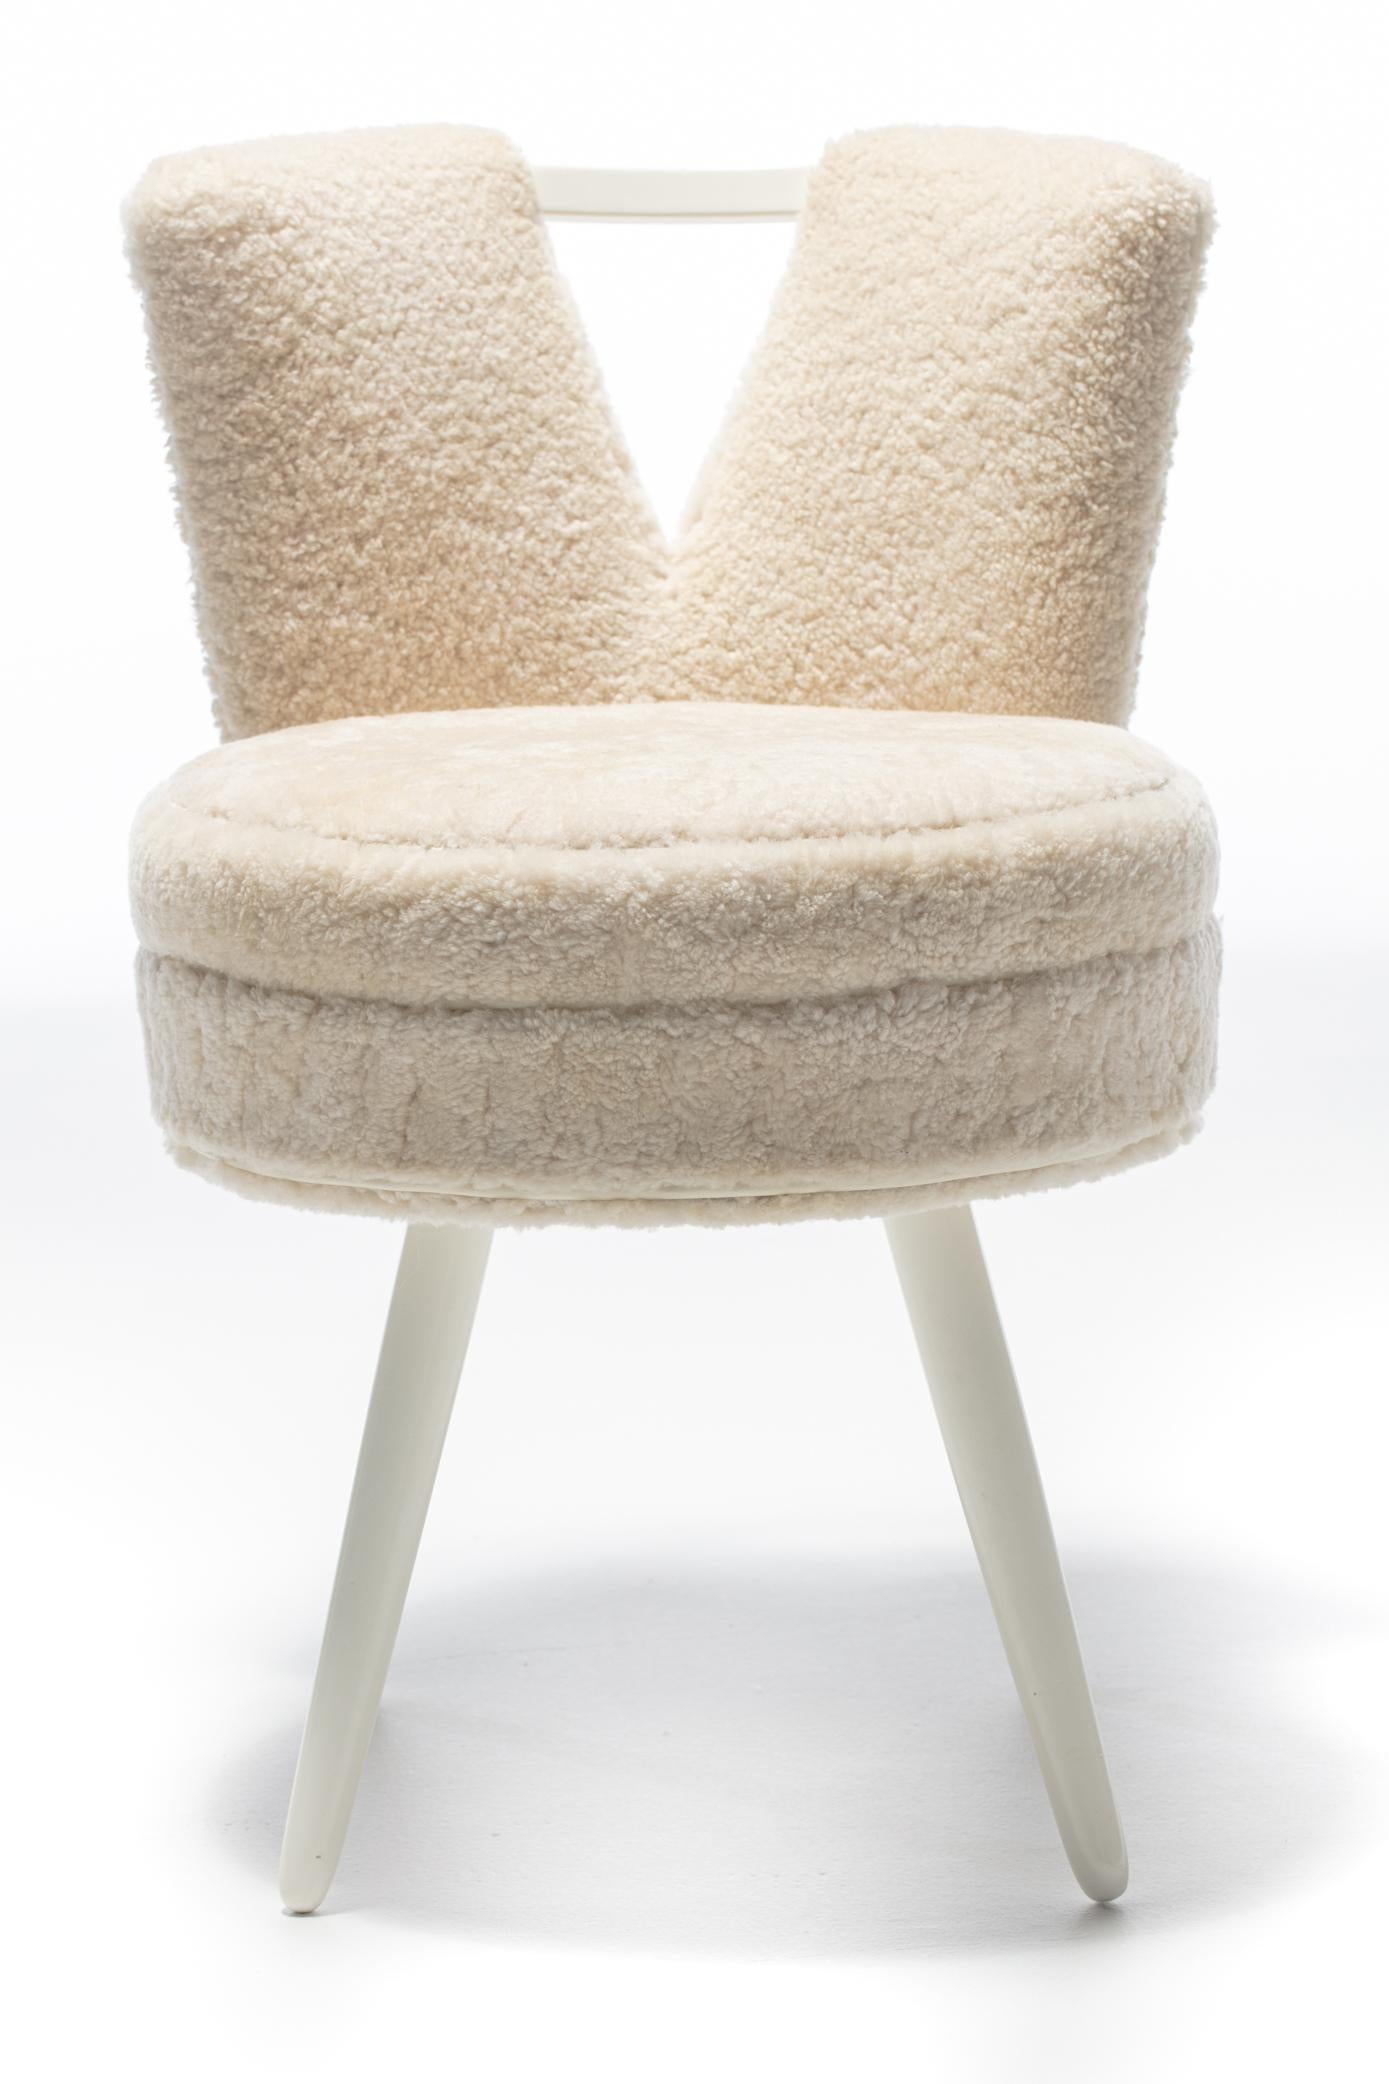 Custom Vanity Stool in Ivory Cream Shearling with Leather Trim 6